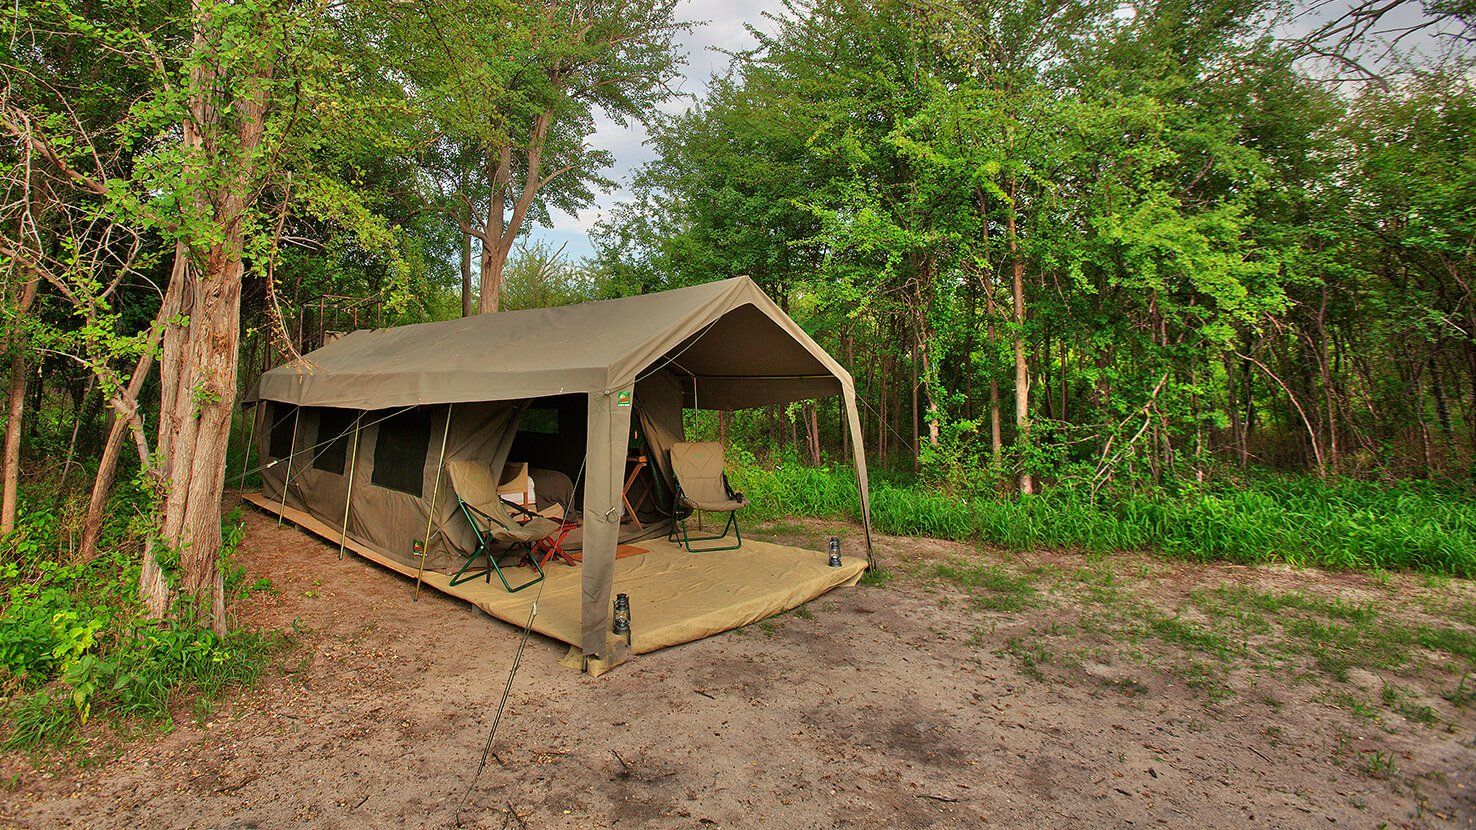 Migration Expedition Camp Tents Botswana - eXplore Plus Travel and Tours